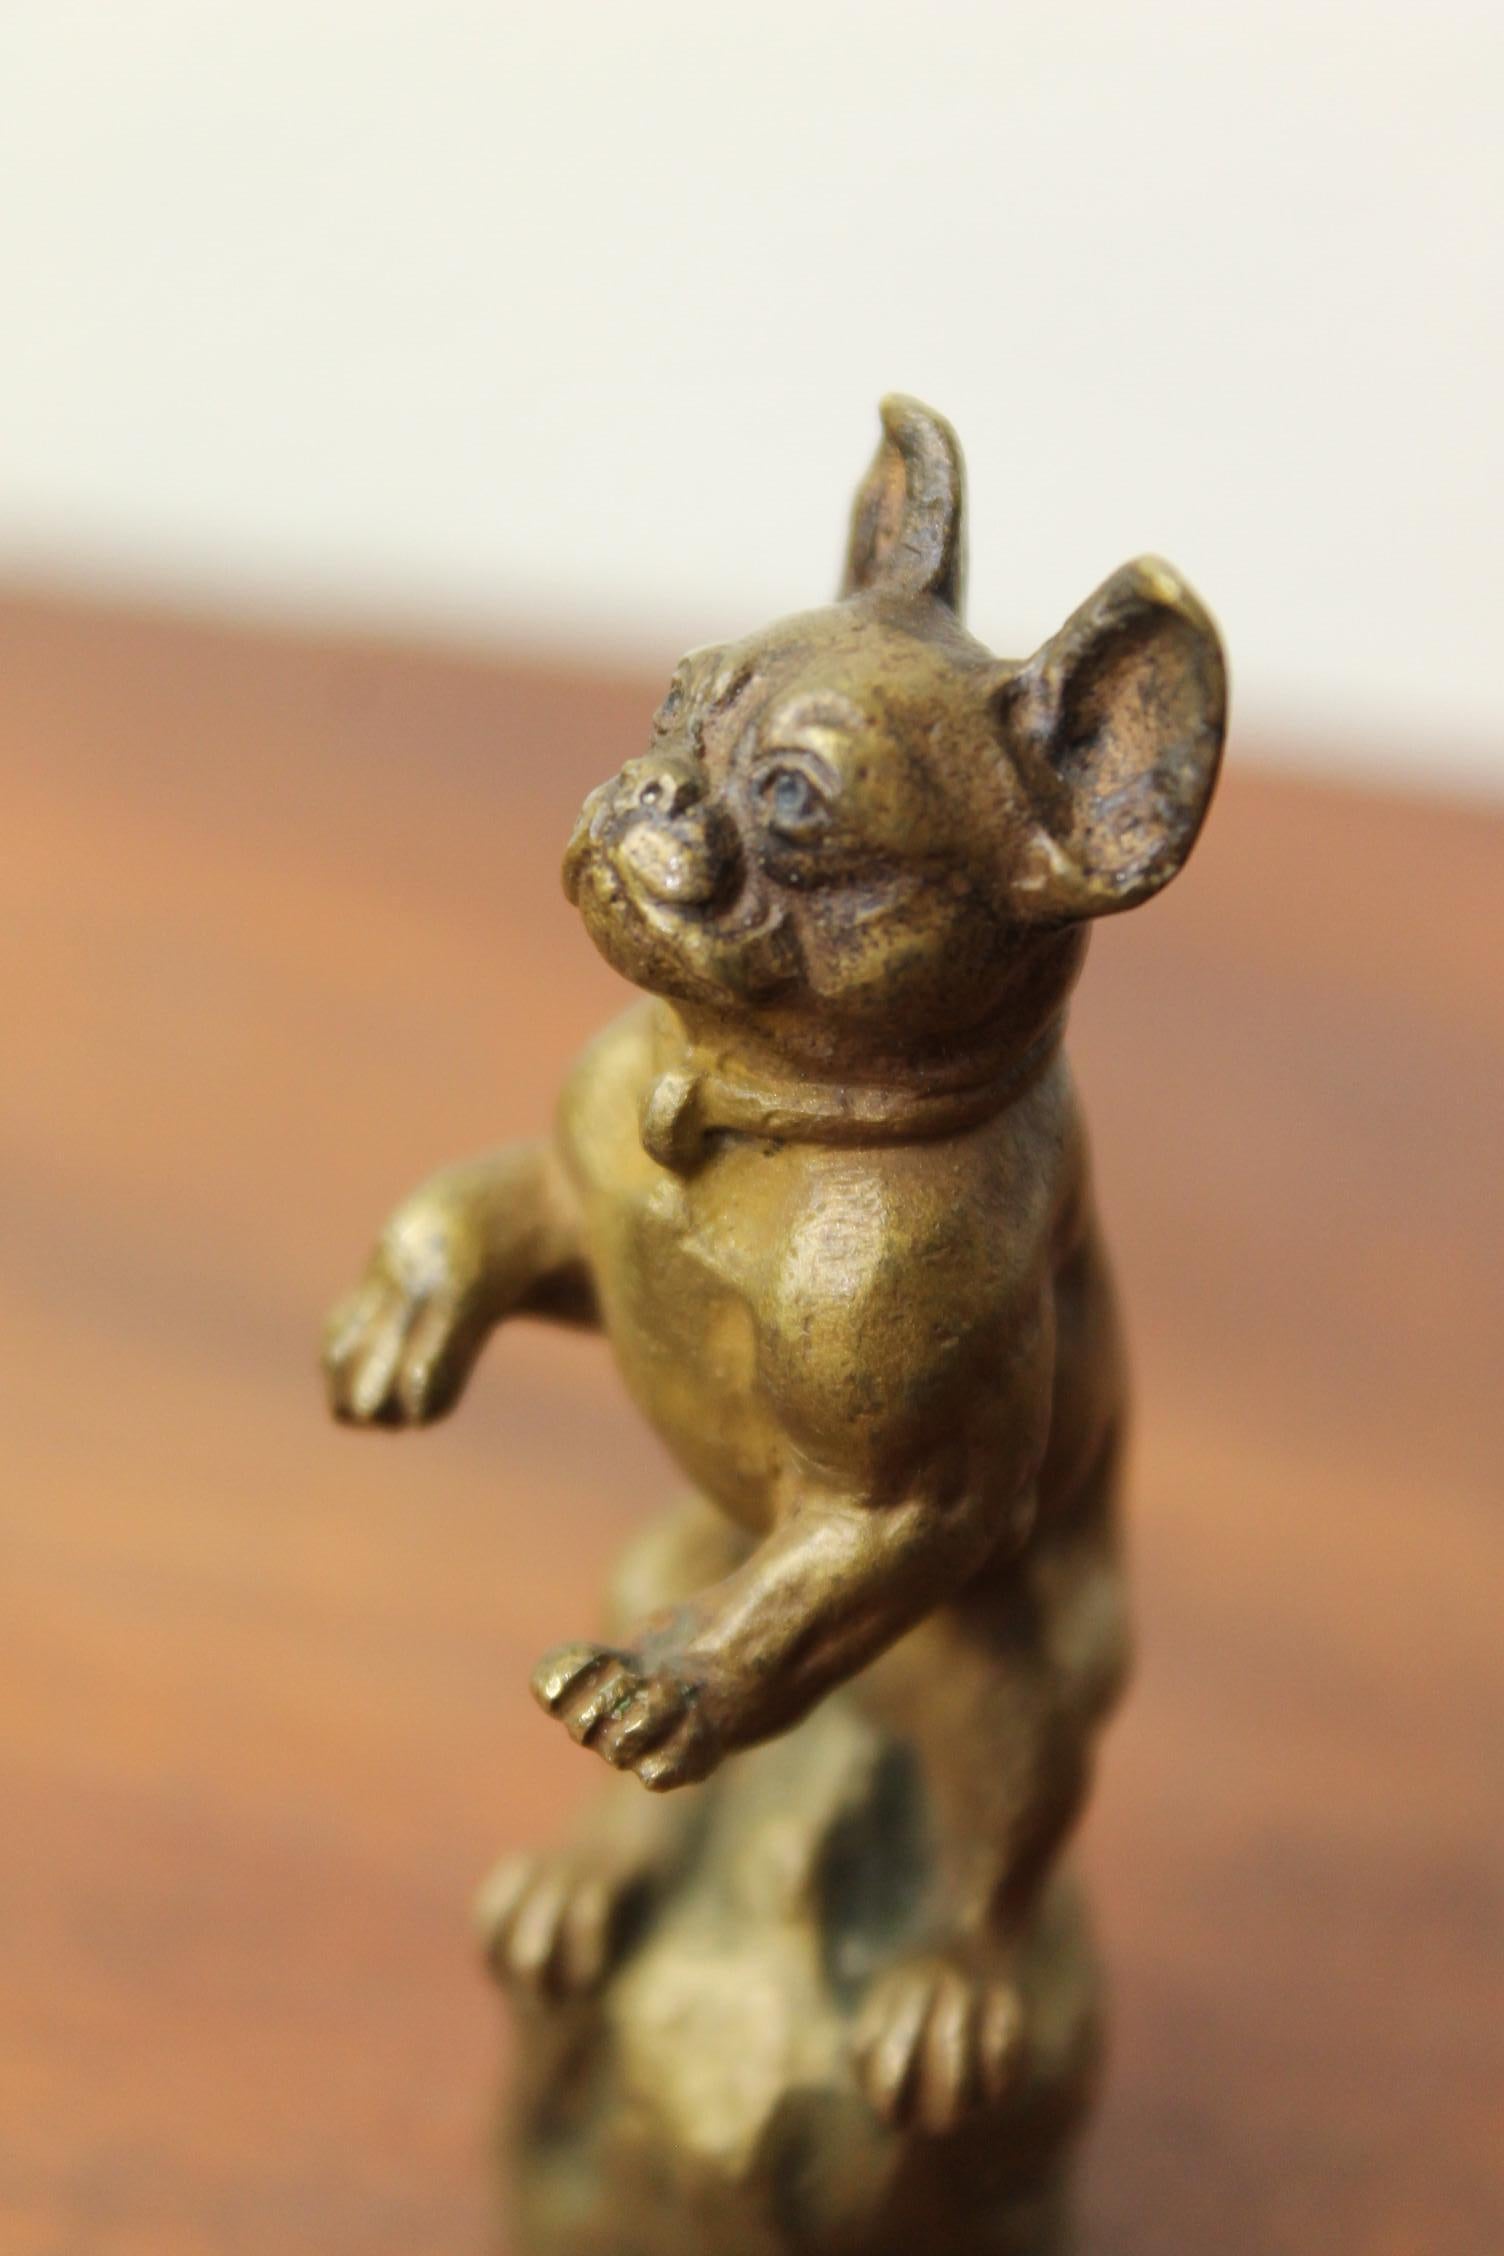 Antique figural wax seal stamp - desk stamp with French bulldog on top.
Very detailed brass bulldog figurine.
Stamp has elegant Initials - Monogram of M and V with Fleur de Lys.
Antique desk accessories - desk stamp - wax seal stamp - small